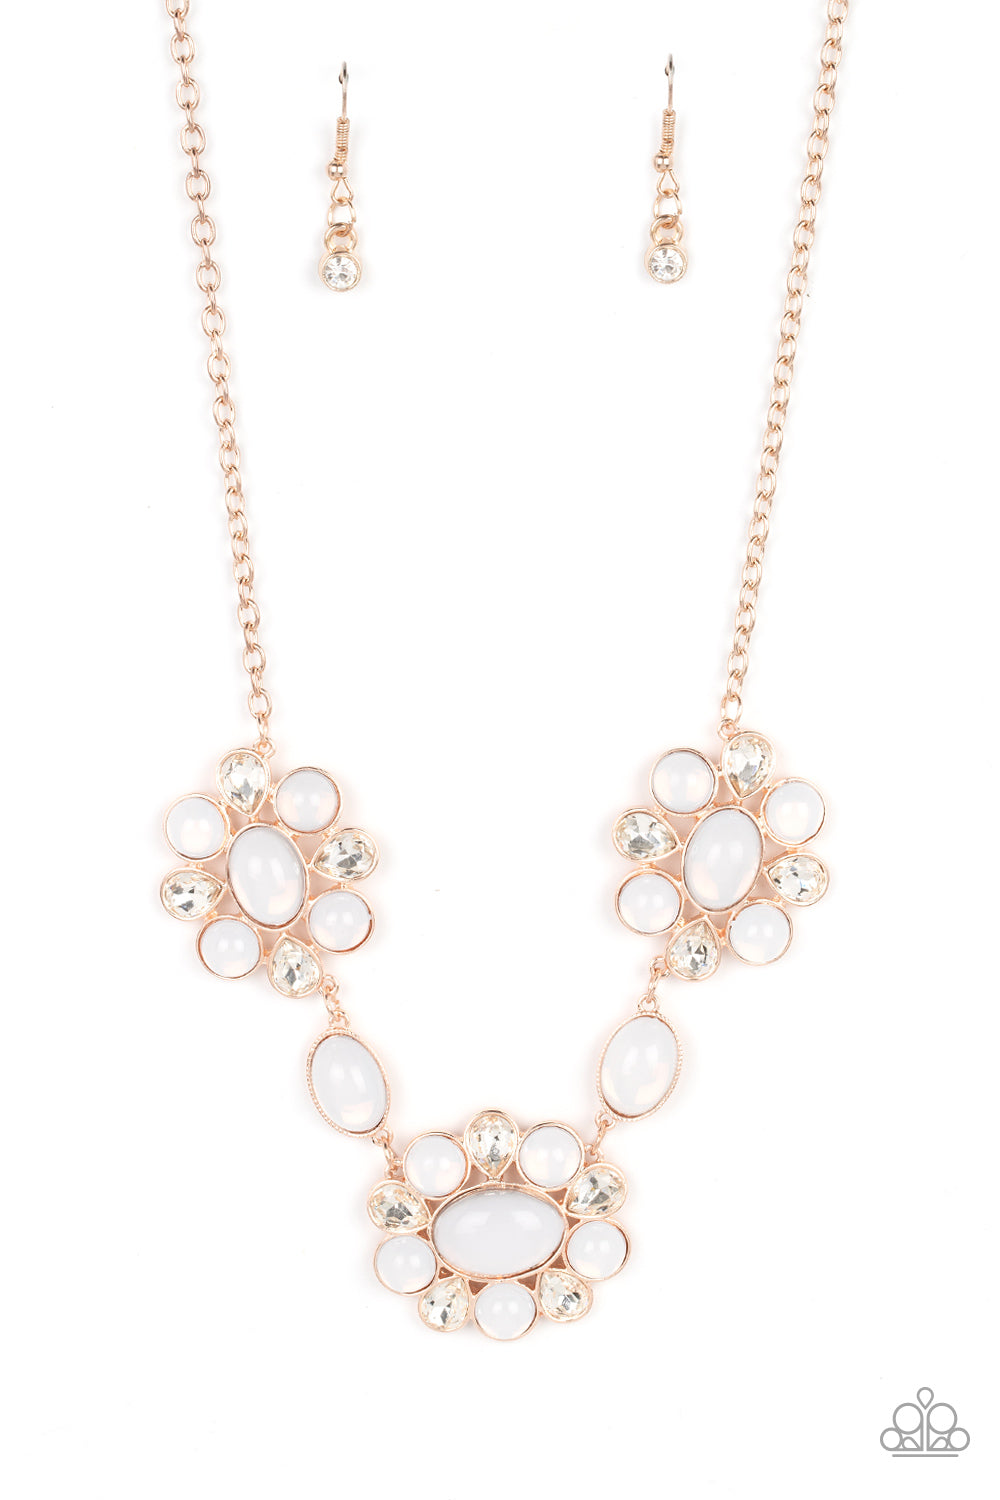 Your Chariot Awaits - Rose Gold Fittings/White Teardrop Rhinestones/Opalescent Beaded Paparazzi Necklace & matching earrings